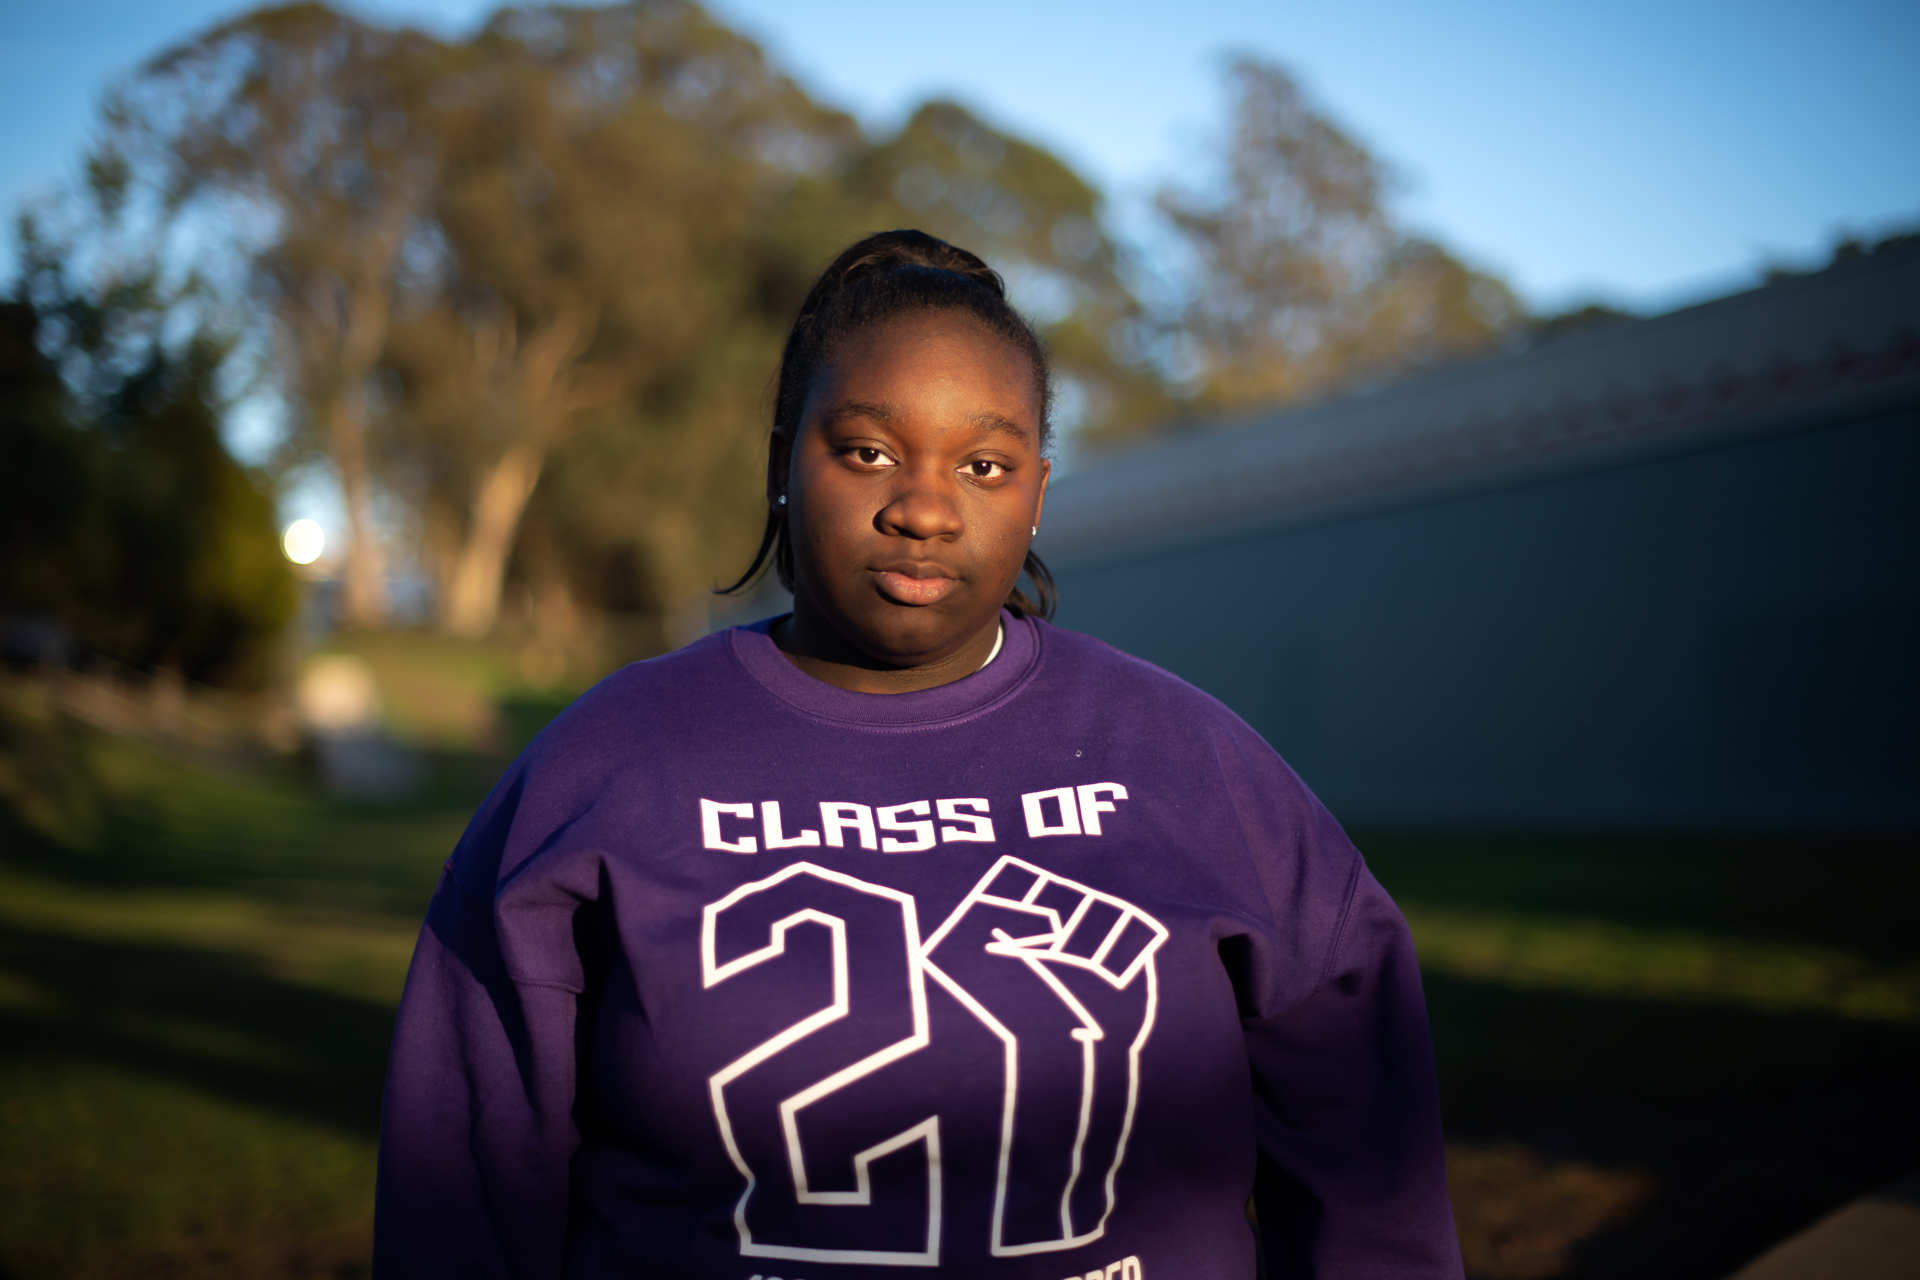 A young woman looks at the camera wearing a purple sweatshirt that says, &outclass of 21" with a raised fist in place of the number 1.